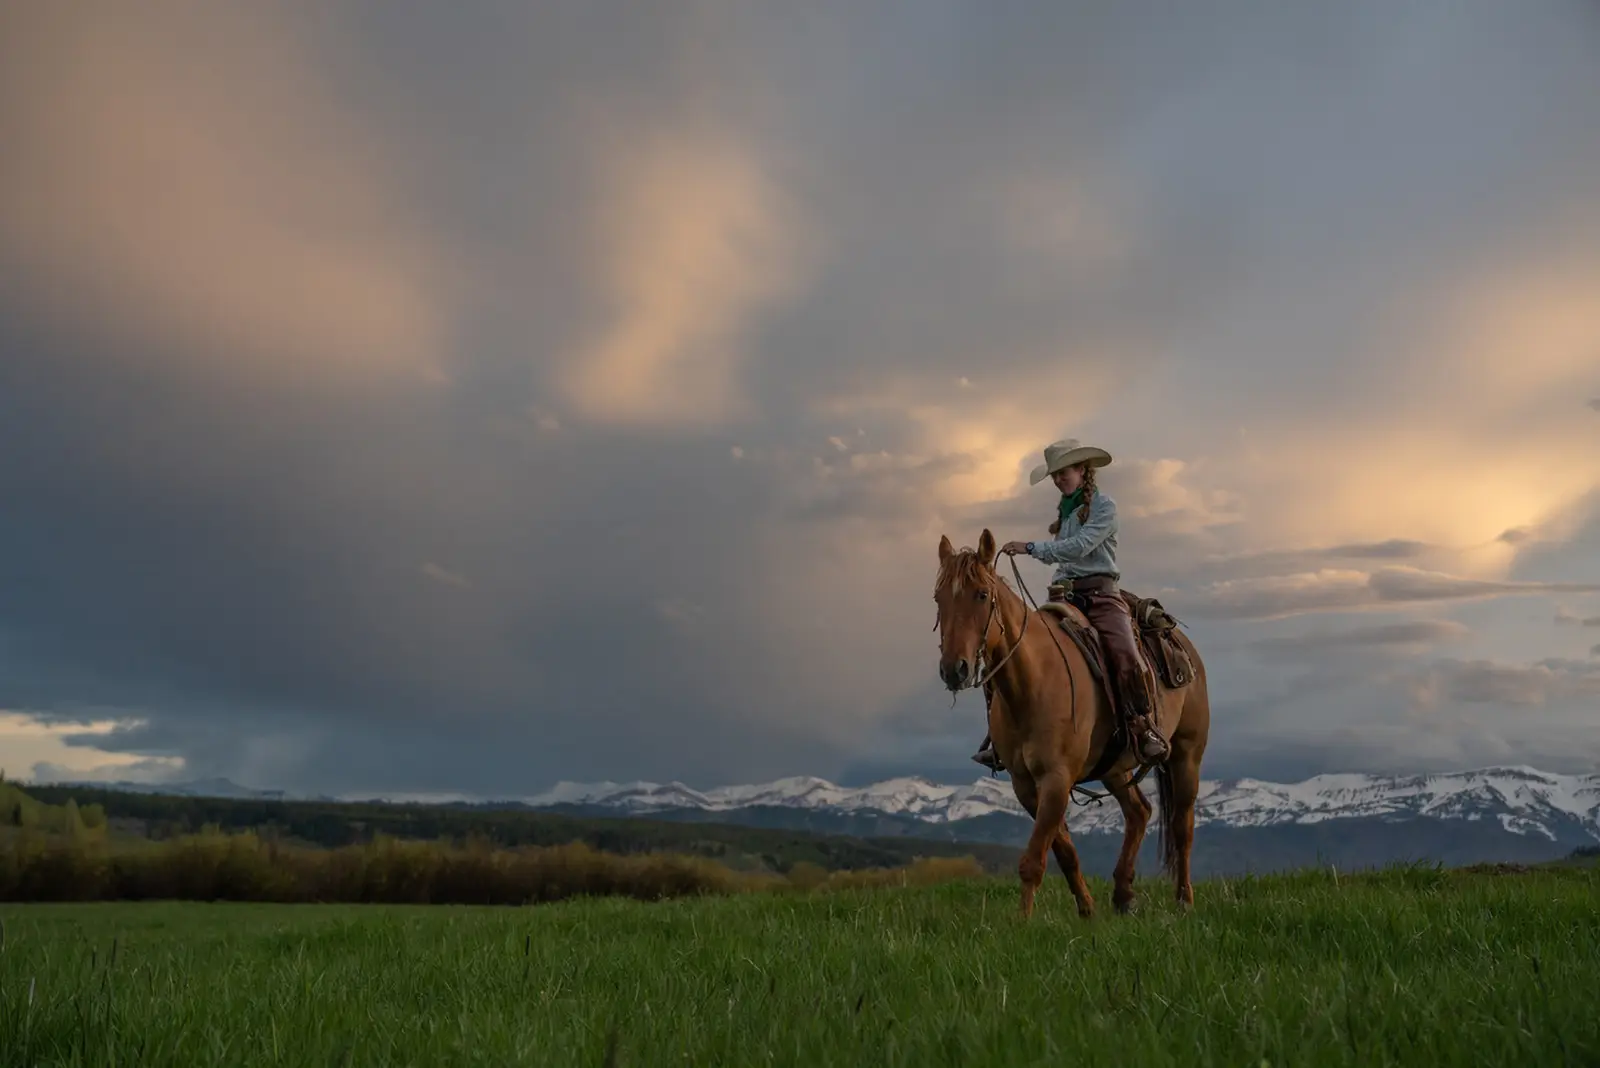 A woman riding on horseback across a field in the Gros Ventre wilderness.